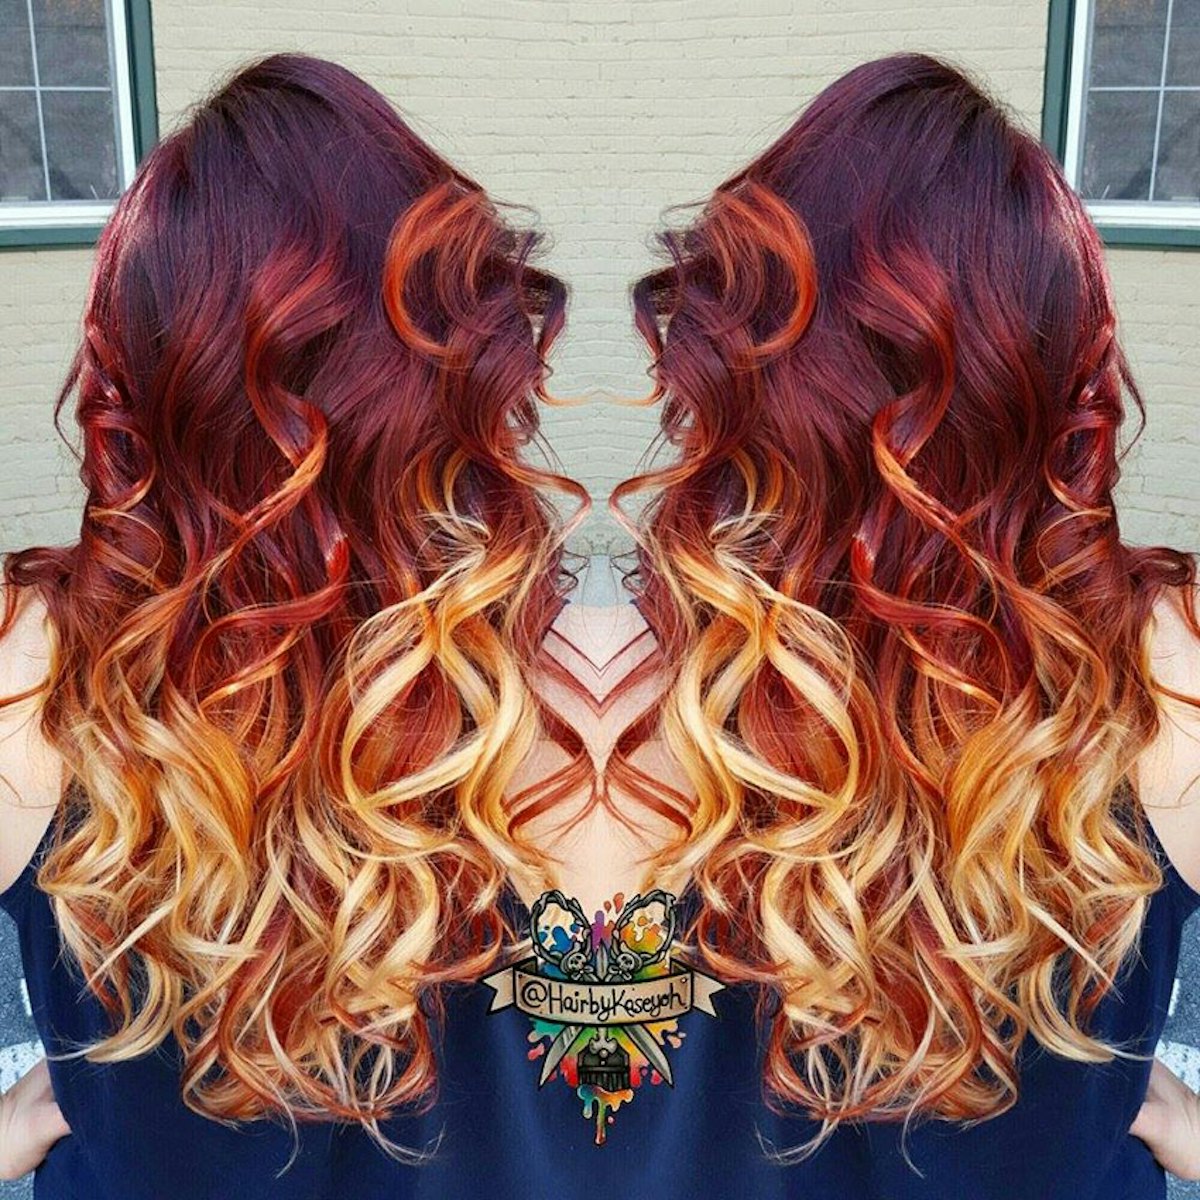 Hair Color How To: Fire Ombré by Kasey O'Hara Skrobe